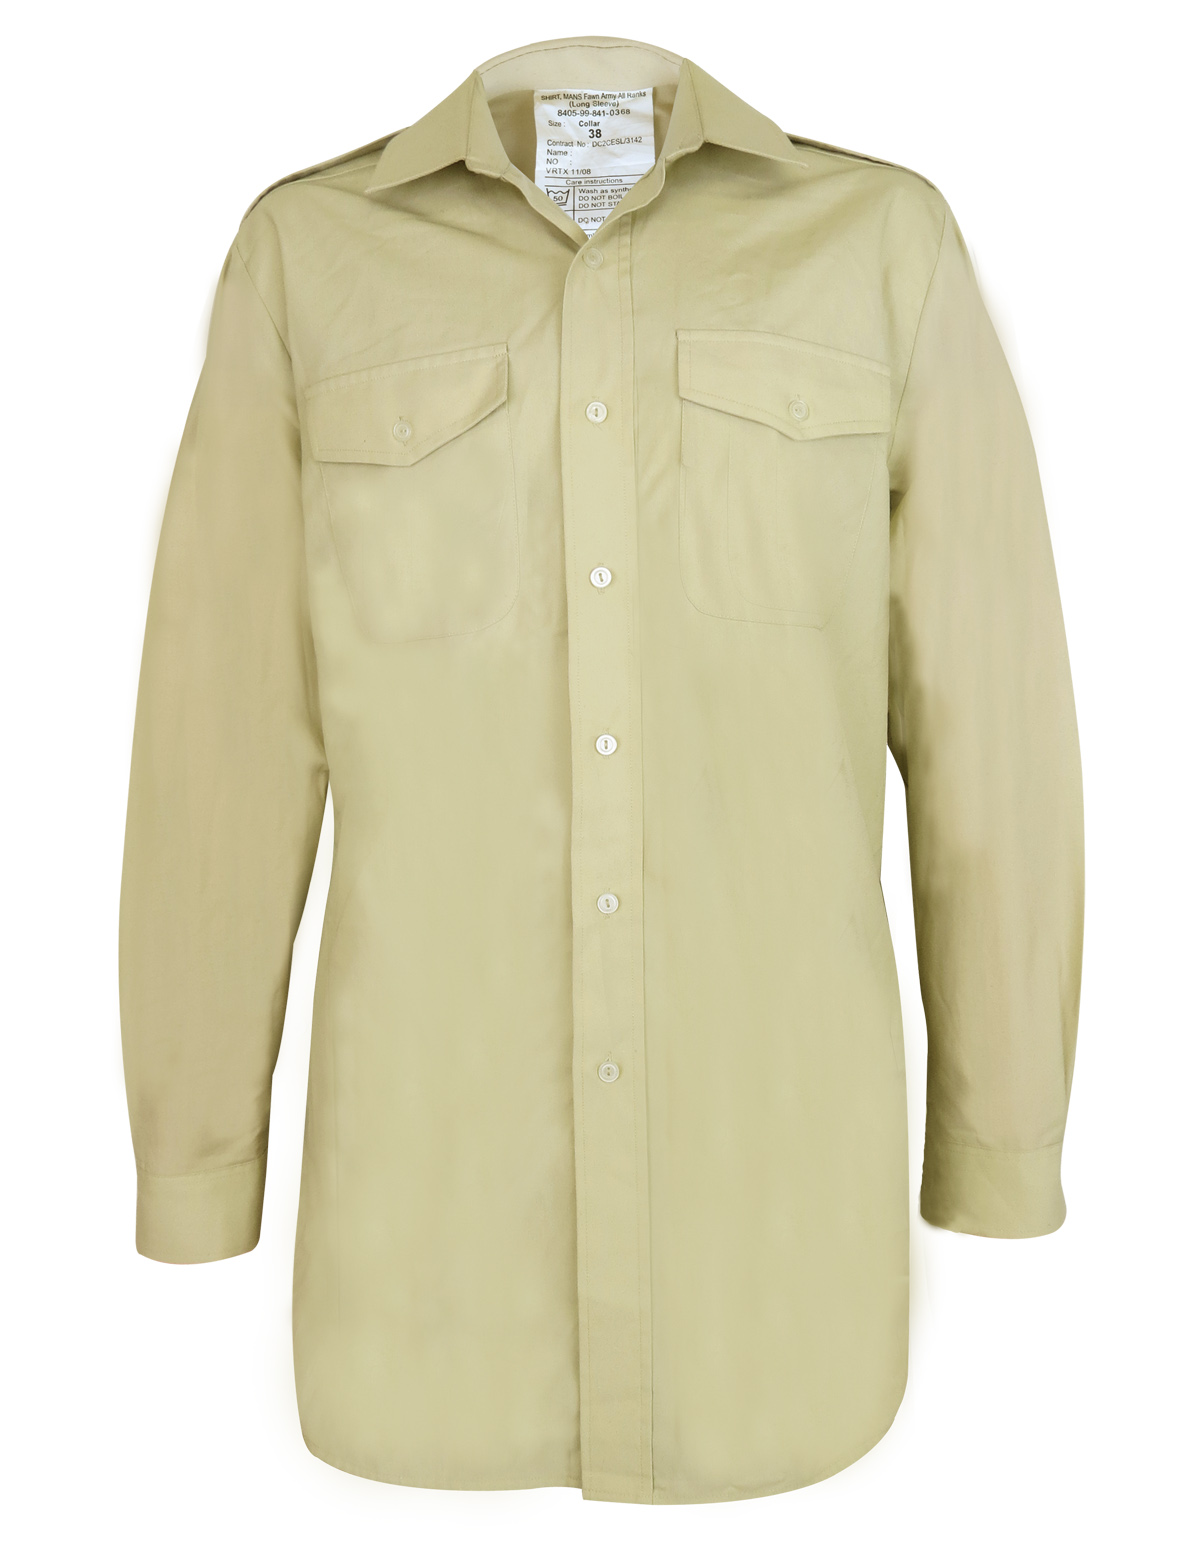 New Mens Long Sleeve Fawn Army Shirt (No.2 FAD) by British Army